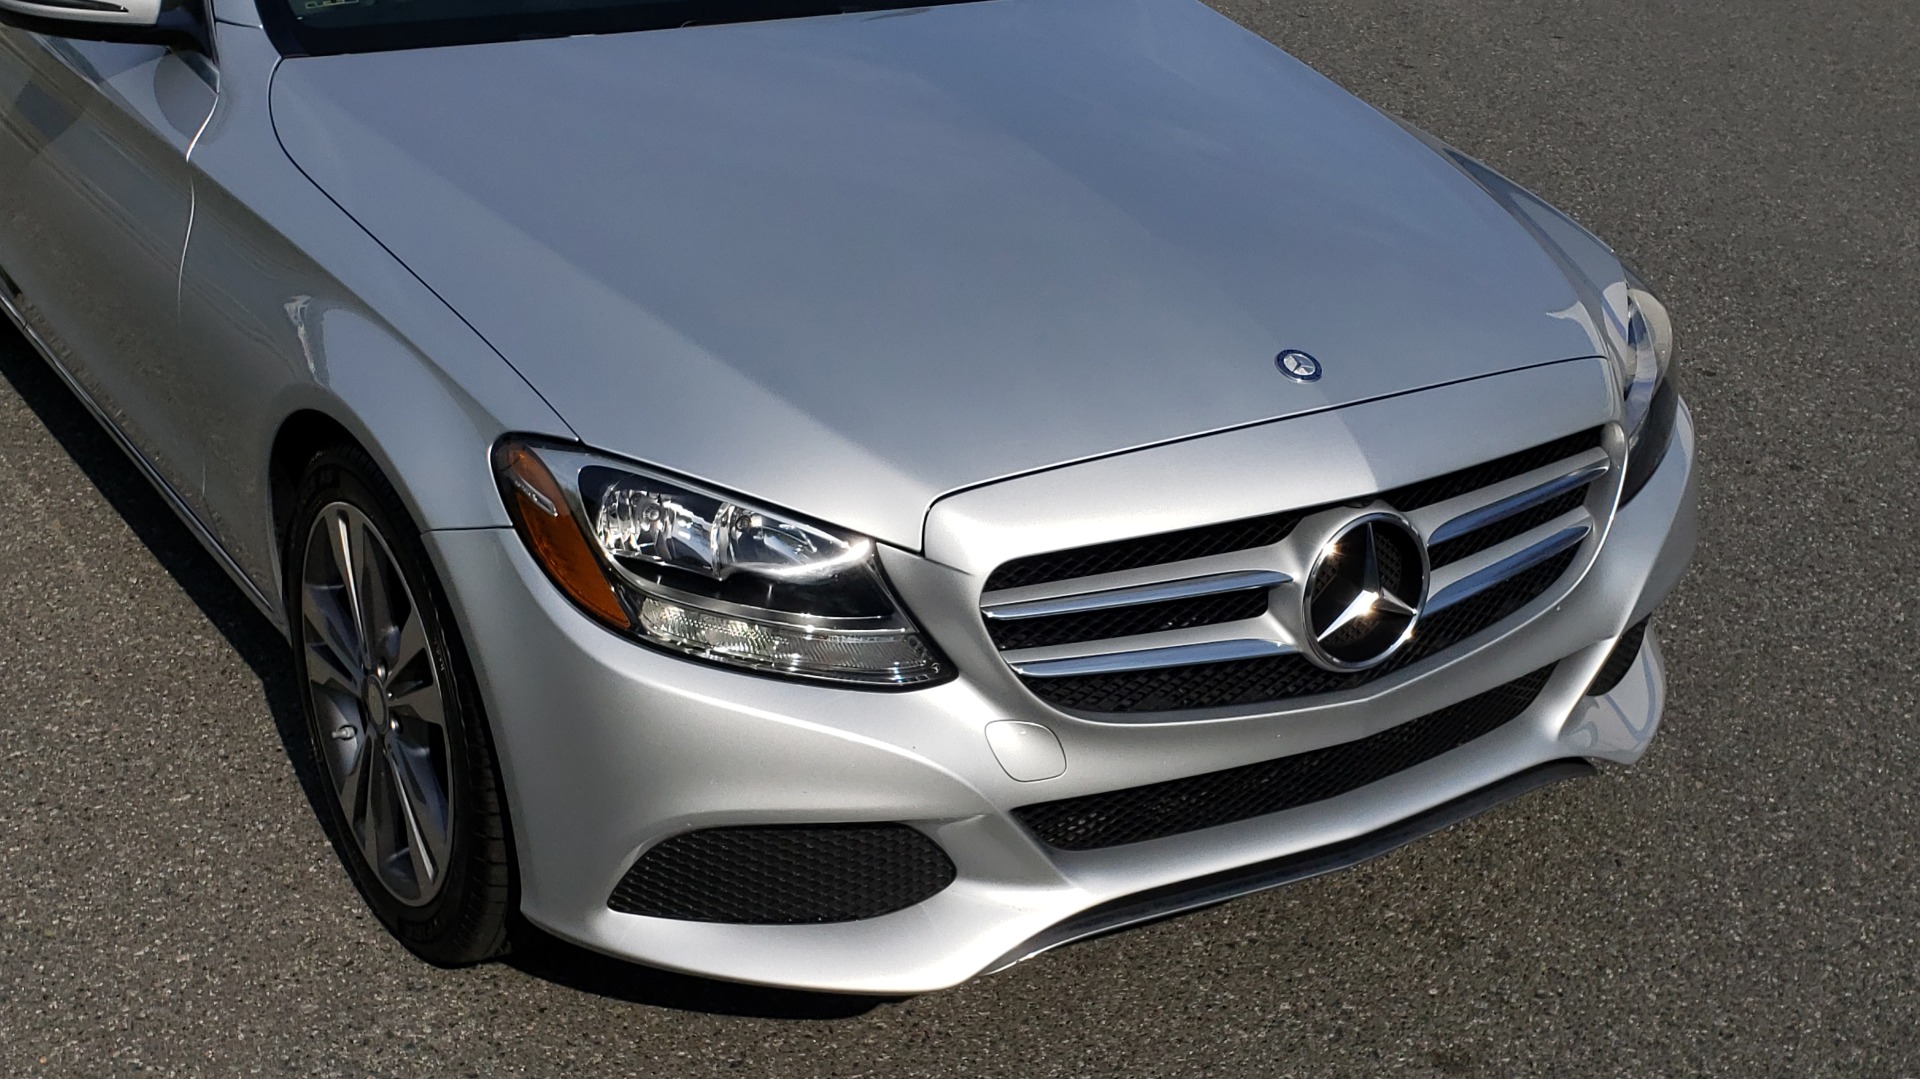 Used 2016 Mercedes-Benz C-CLASS C 300 PREMIUM / NAV / SNRF/ HTD STS / REARVIEW / BSM for sale Sold at Formula Imports in Charlotte NC 28227 26